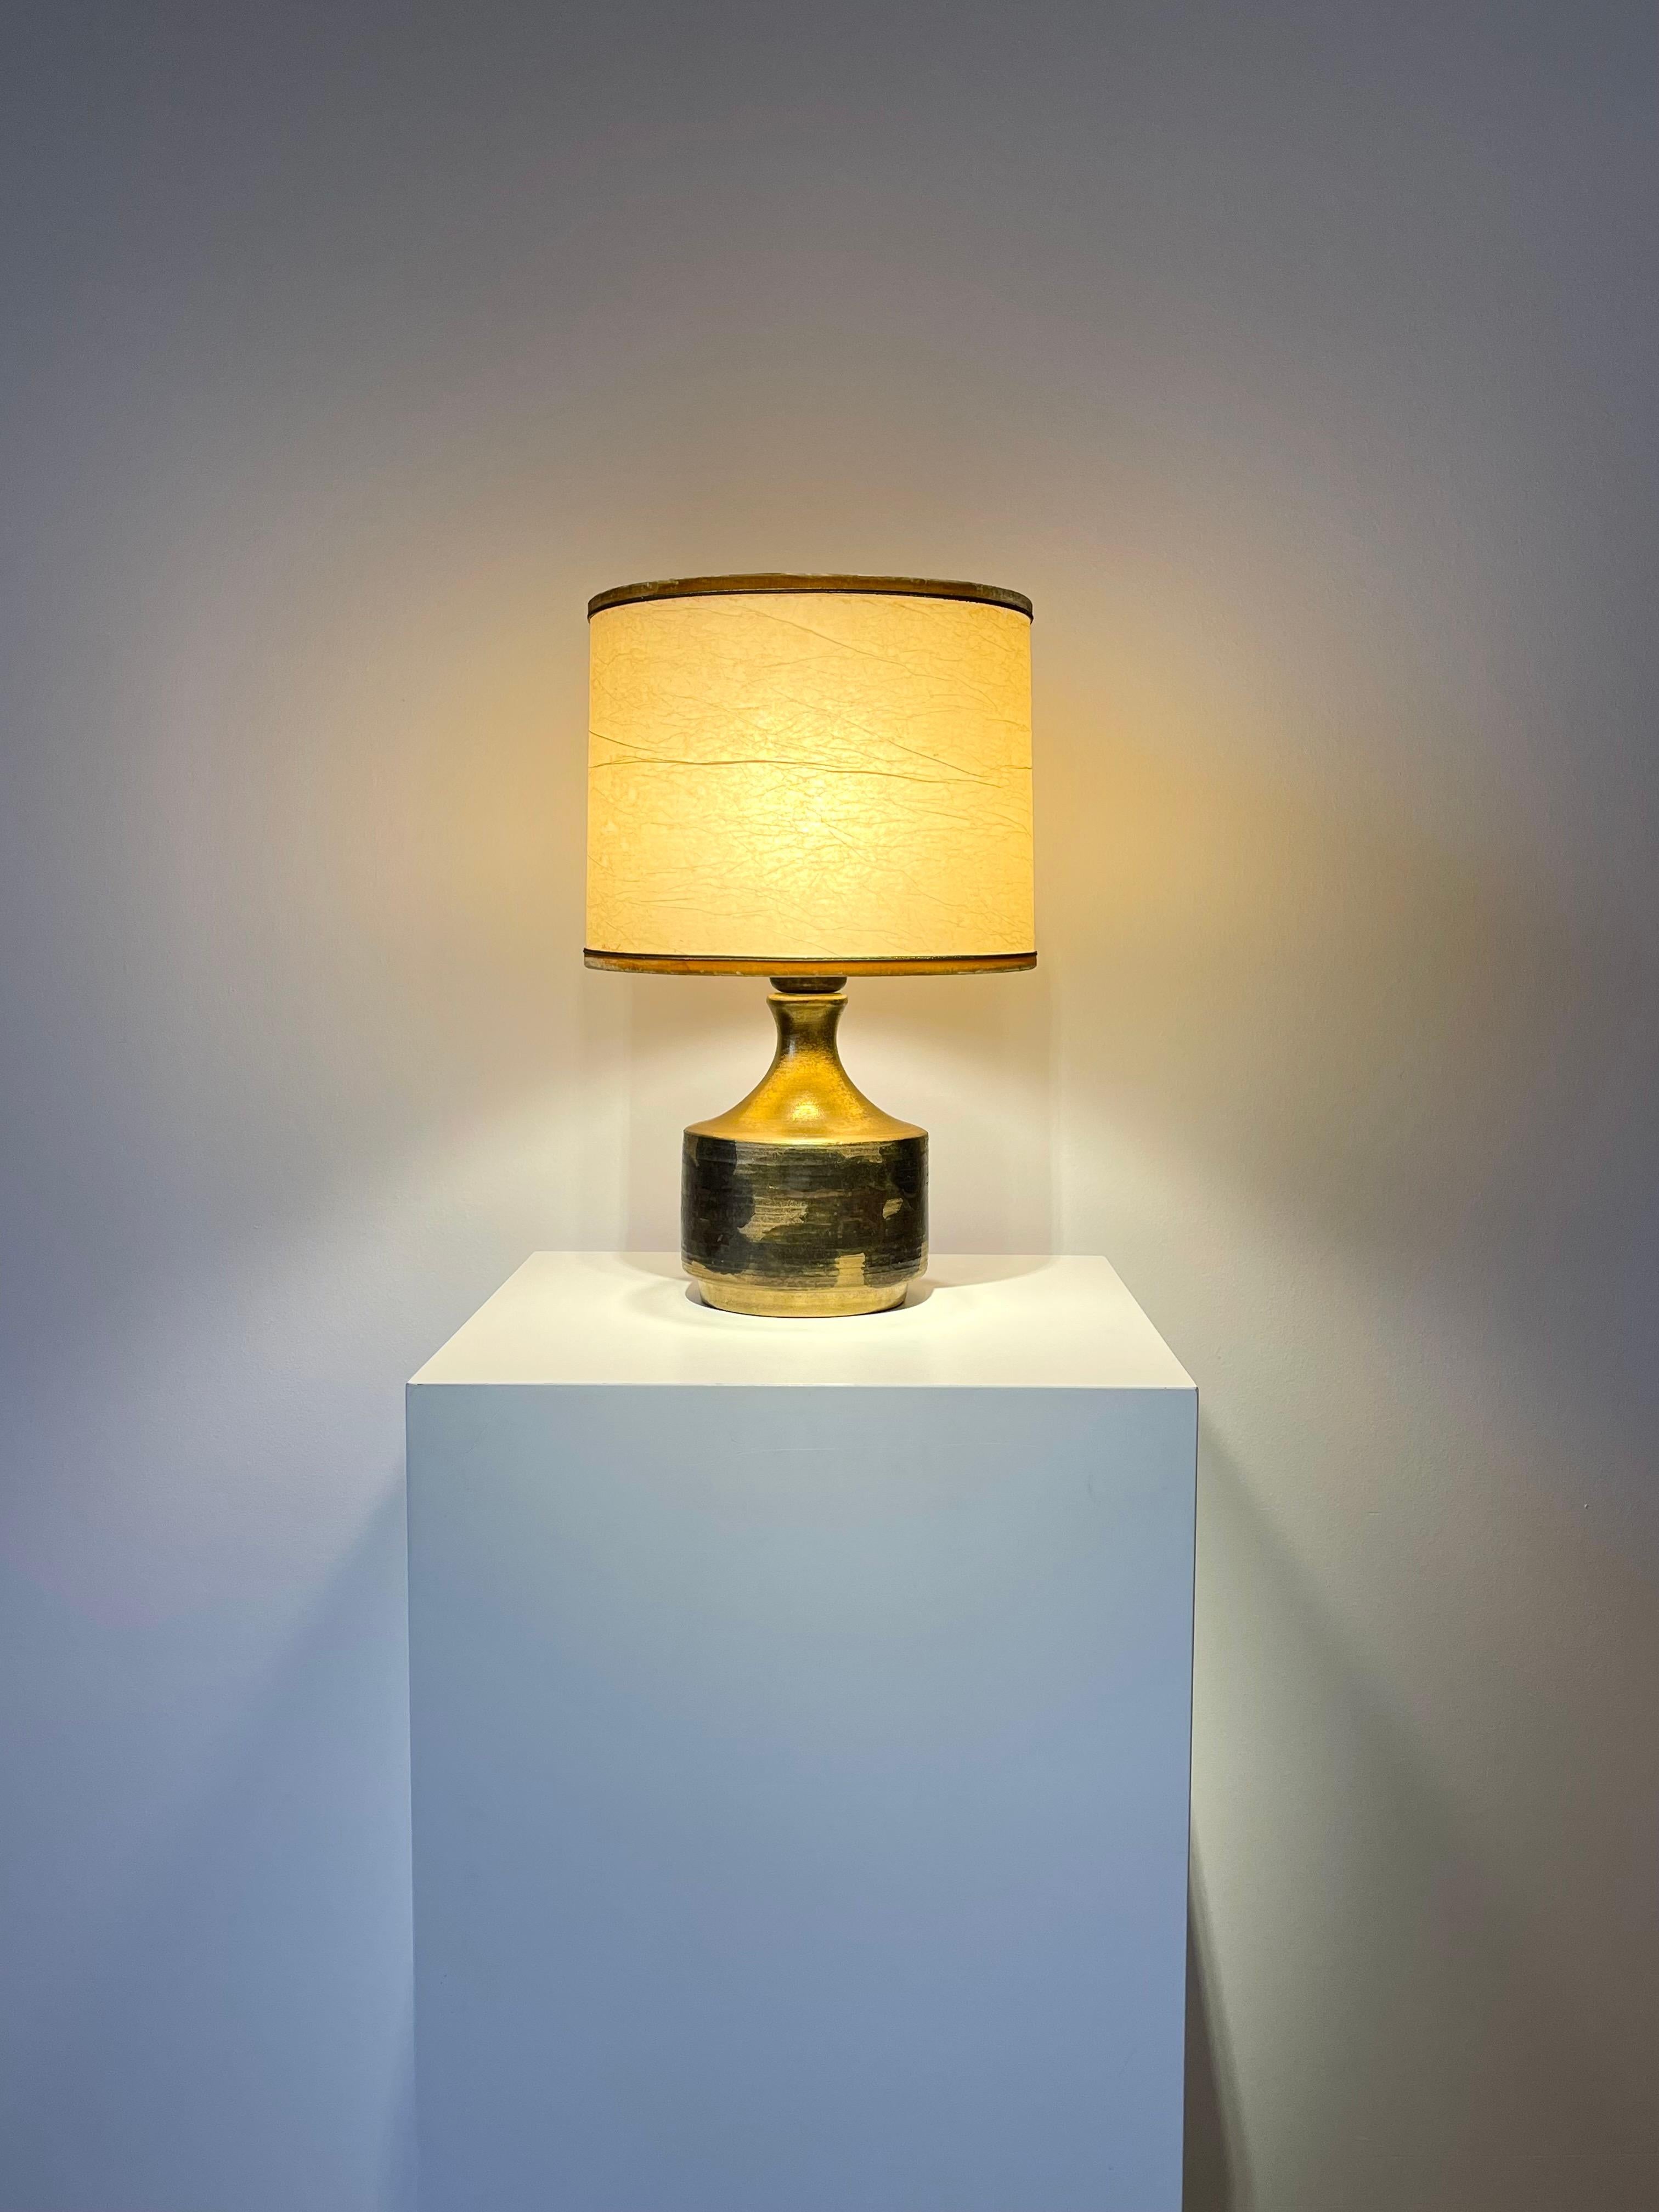 Golden luster glazed ceramic table lamp by ceramic artist Holger Granbäck, Savitorppa, Finland 1960s.
Original shade ( with signs of use, due to the age, but otherwise in good condition), with velvet trimmings, included.
Measures: Height with